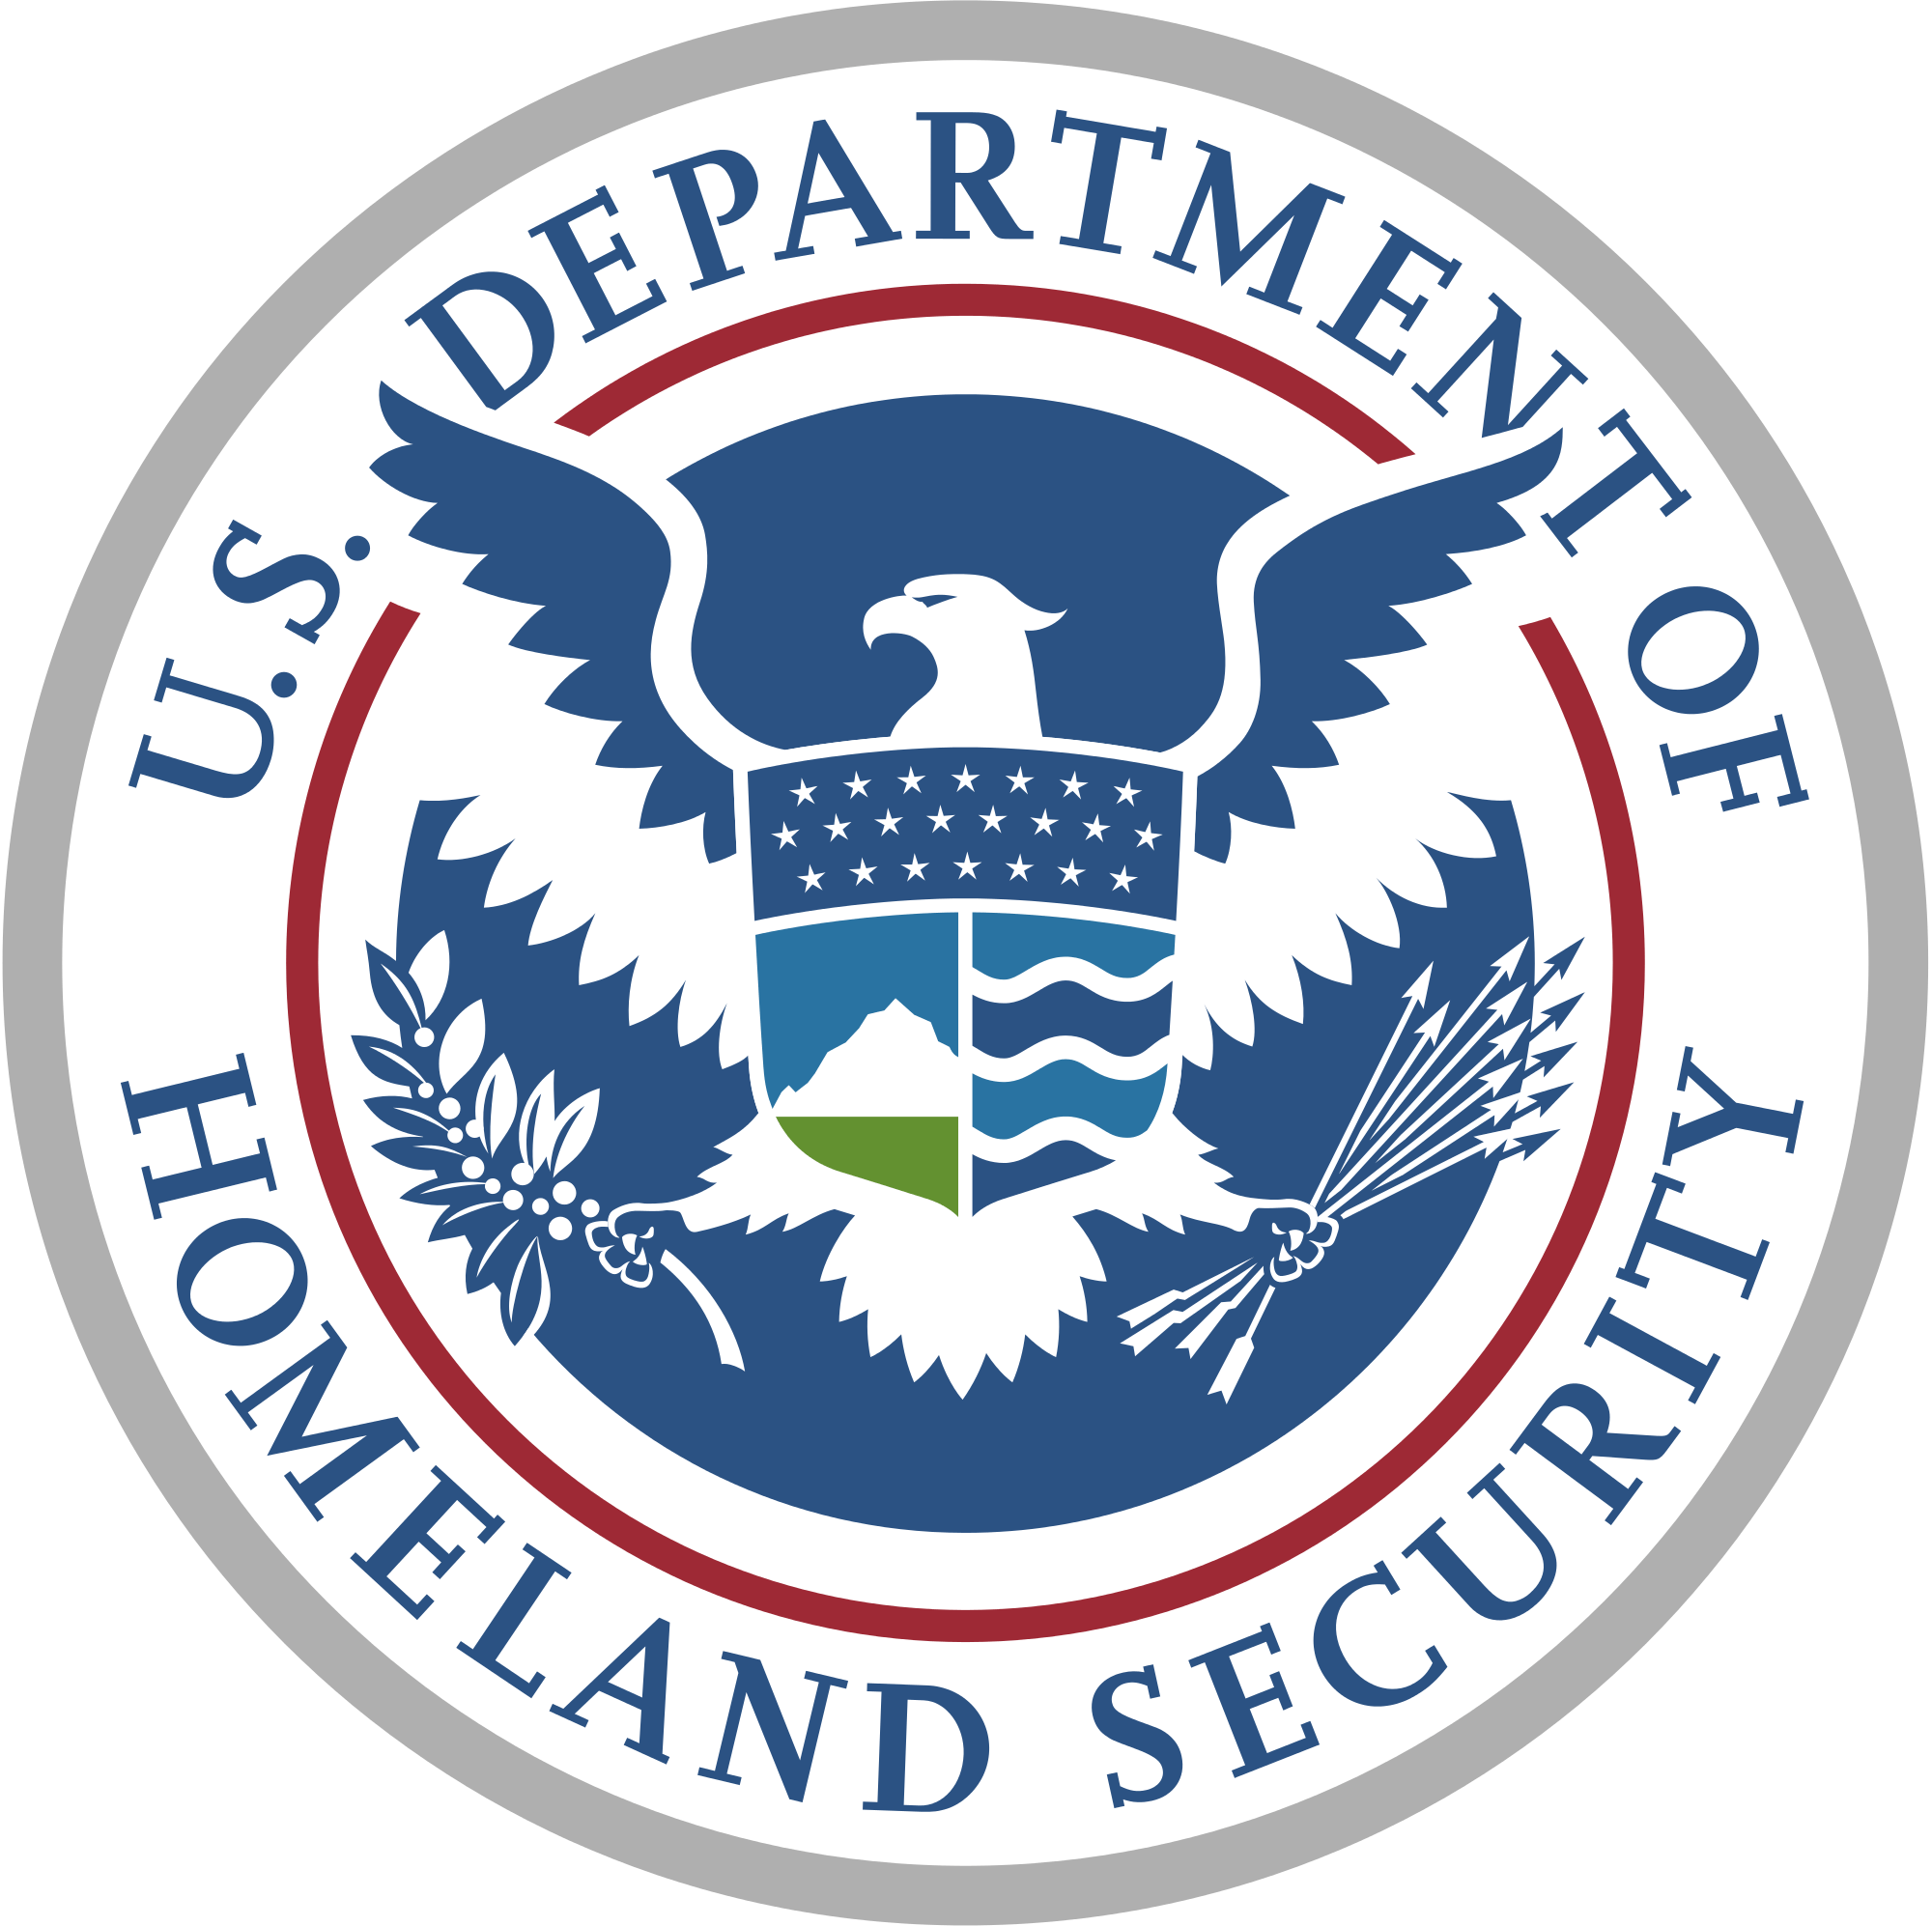 United states jobs alliance security